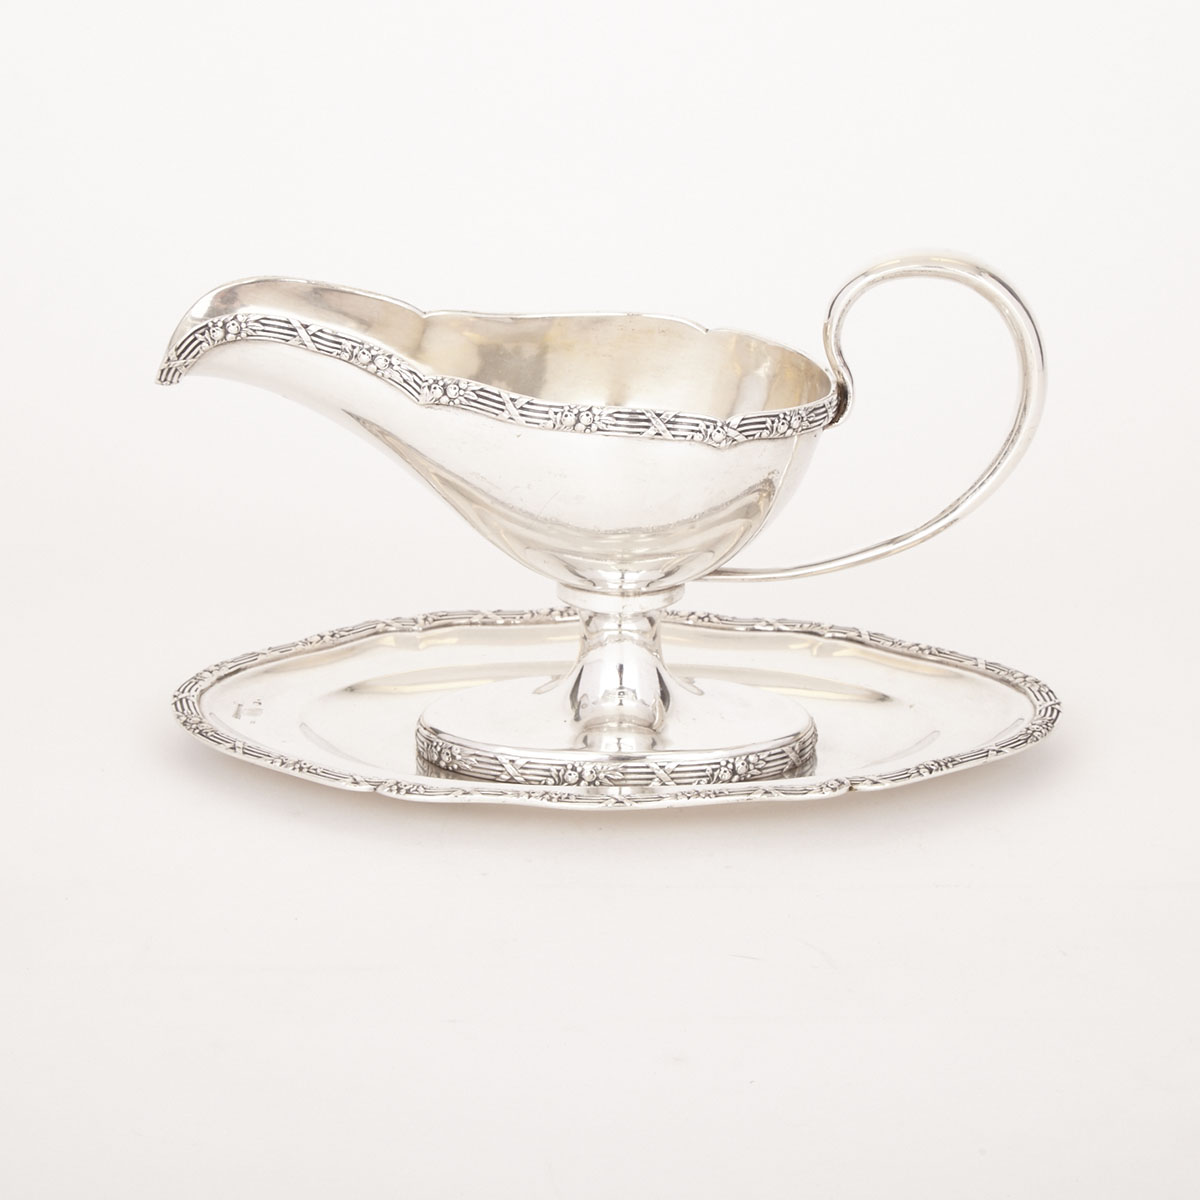 Austro-Hungarian Silver Sauceboat, early 20th century